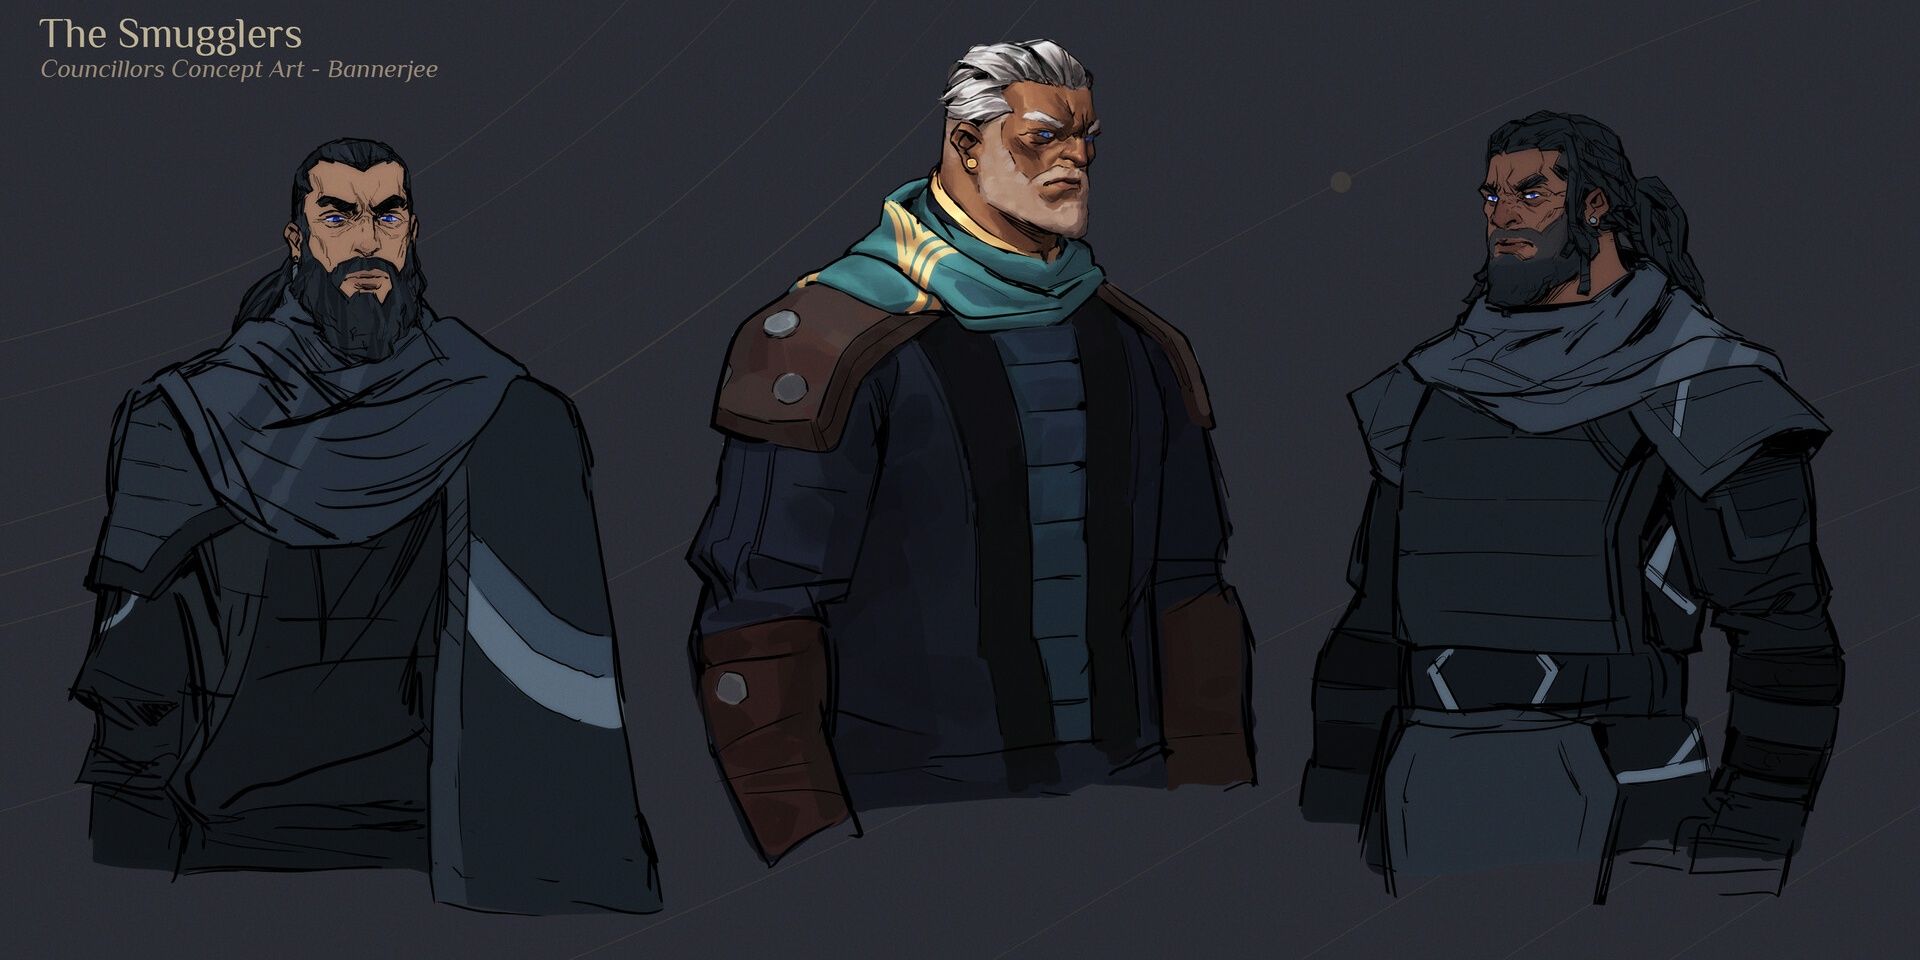 Concept art of The Smugglers including Bannerjee